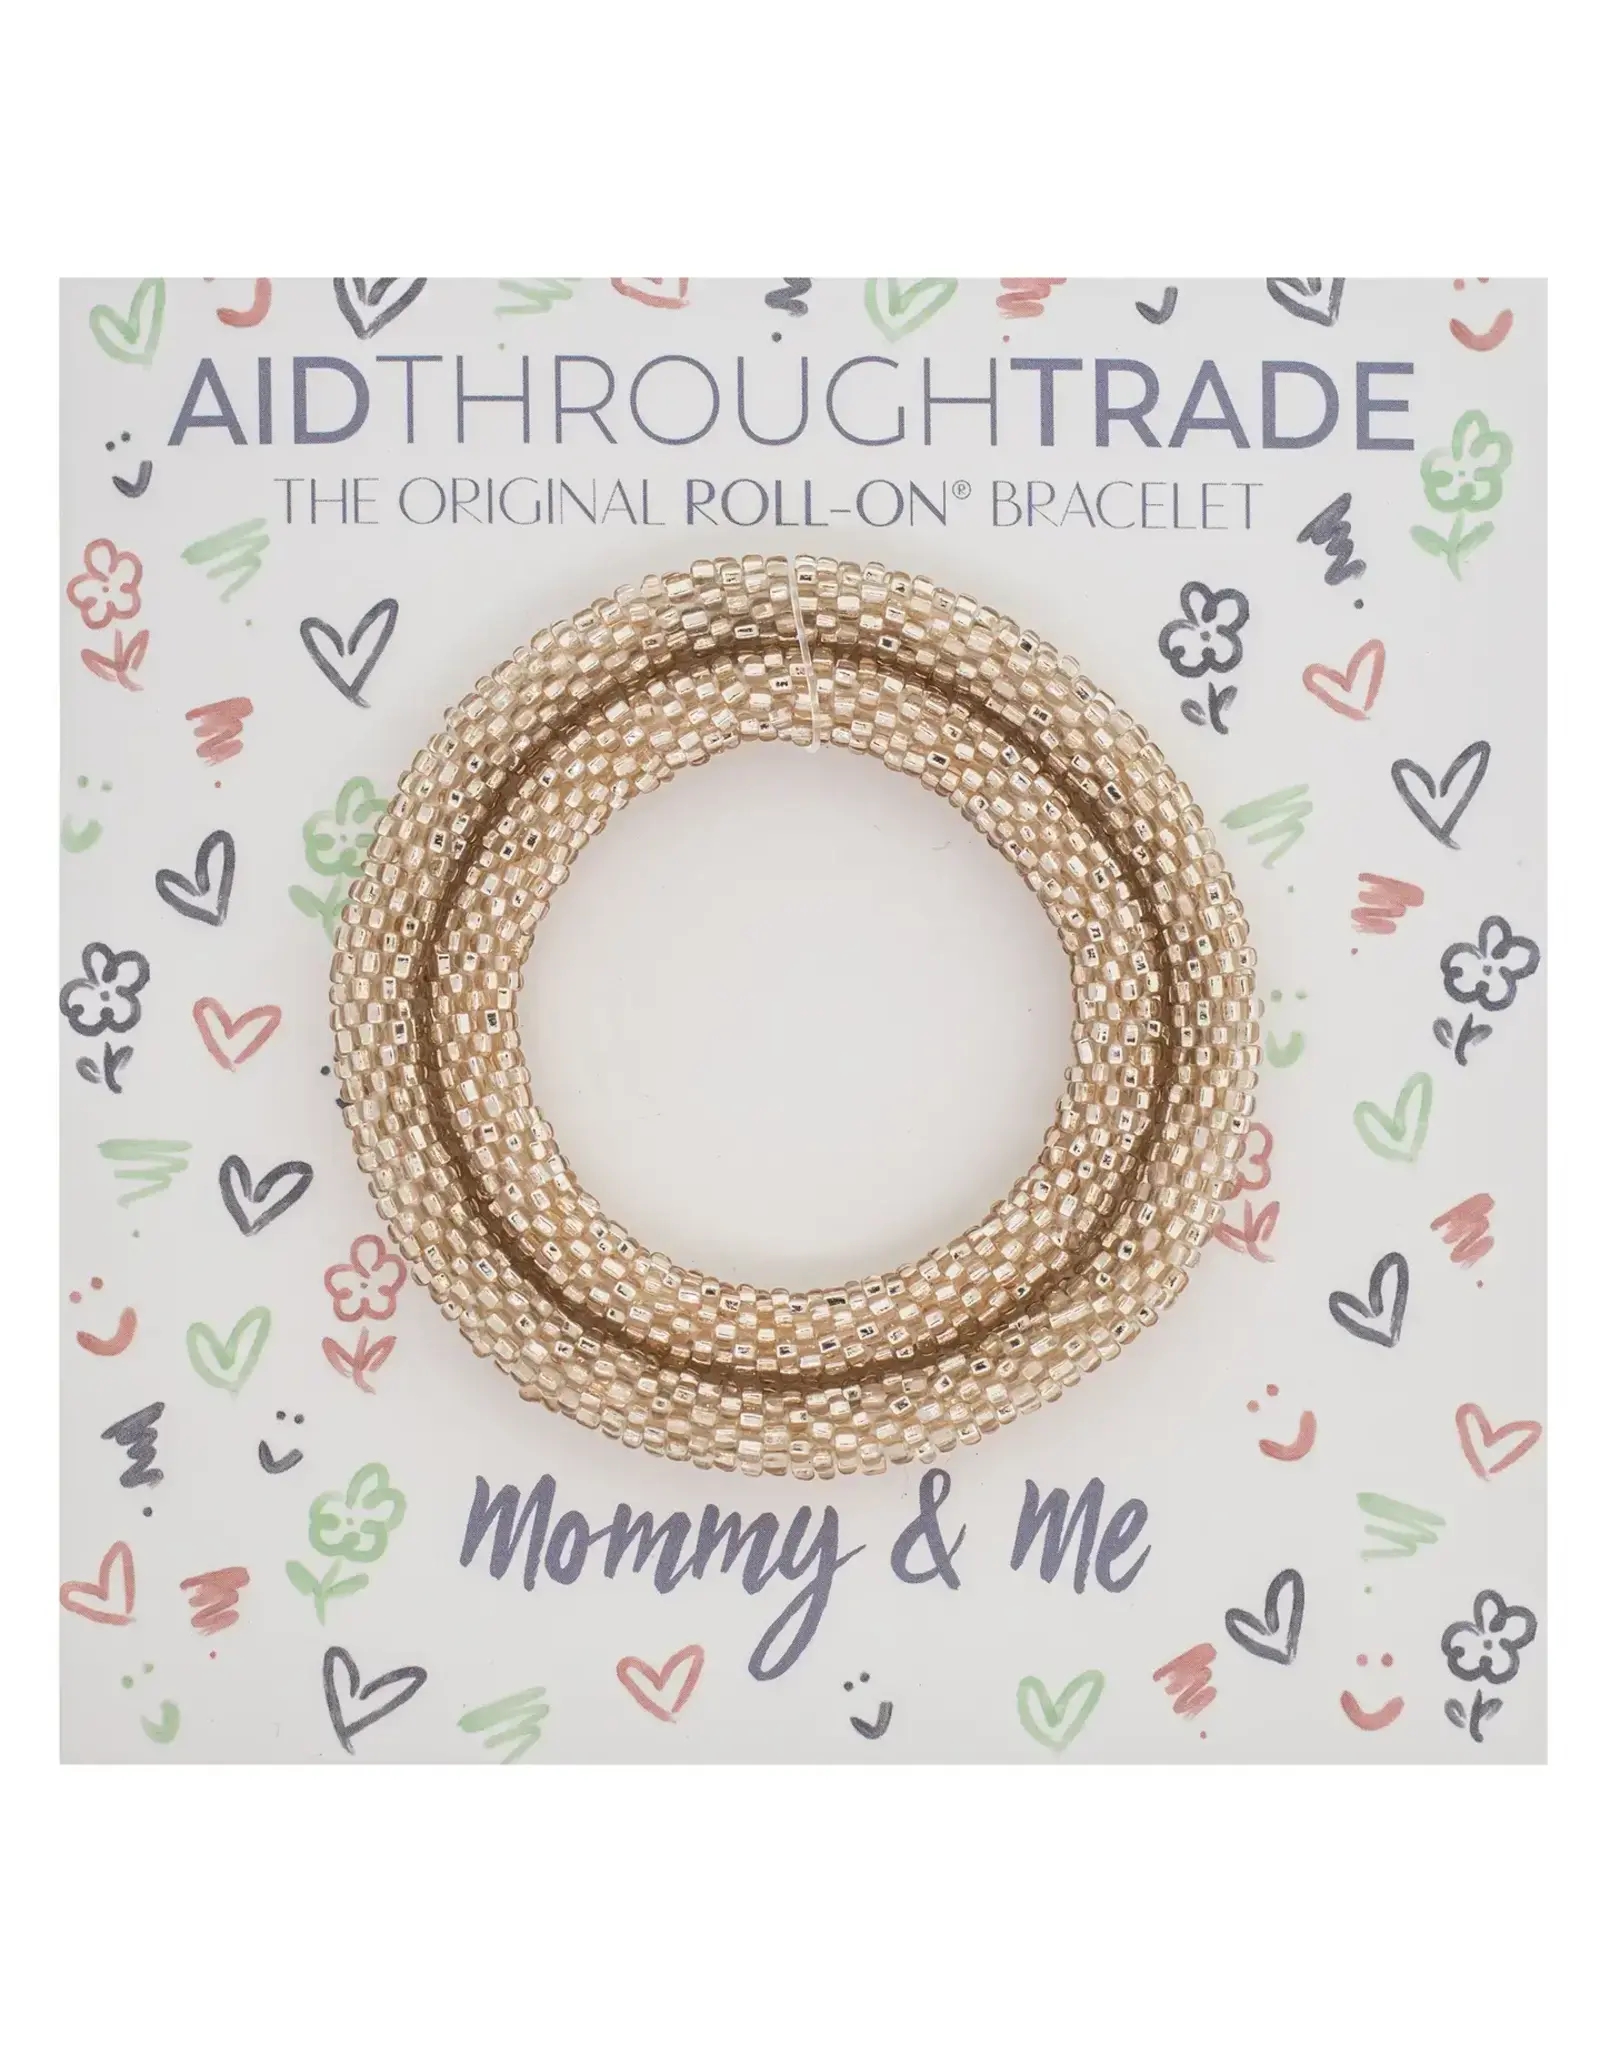 Aid Through Trade/Faire Mommy & Me Roll-On® Bracelets Bubbly